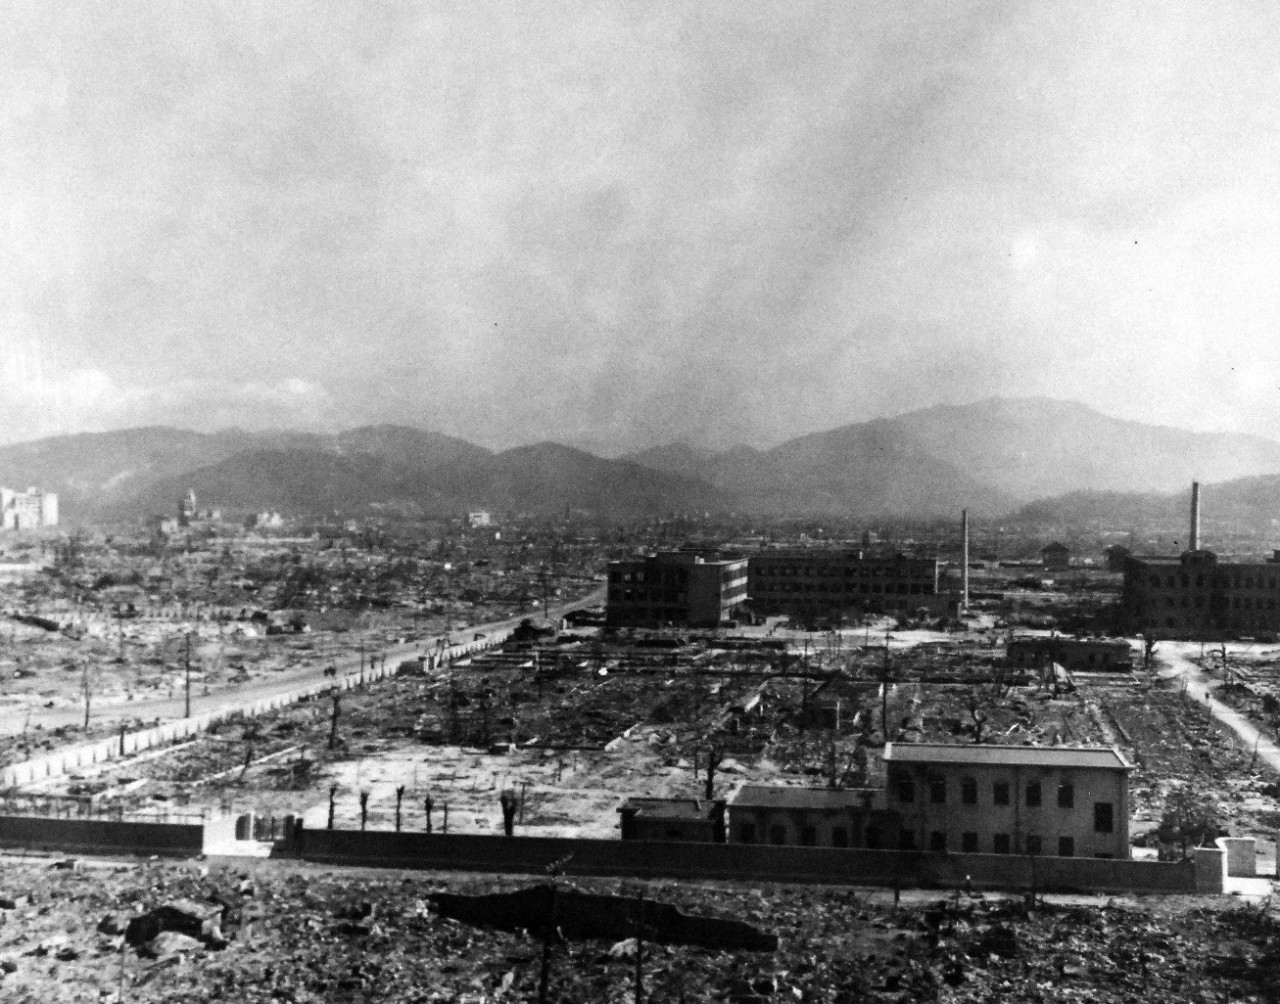 80-G-373267:  Hiroshima, Japan, 1945.   Atomic Bomb damage to Hiroshima, Japan.  Photograph released, October 14, 1945.  U.S. Navy Photograph, now in the collections of the National Archives. (2015/12/08).